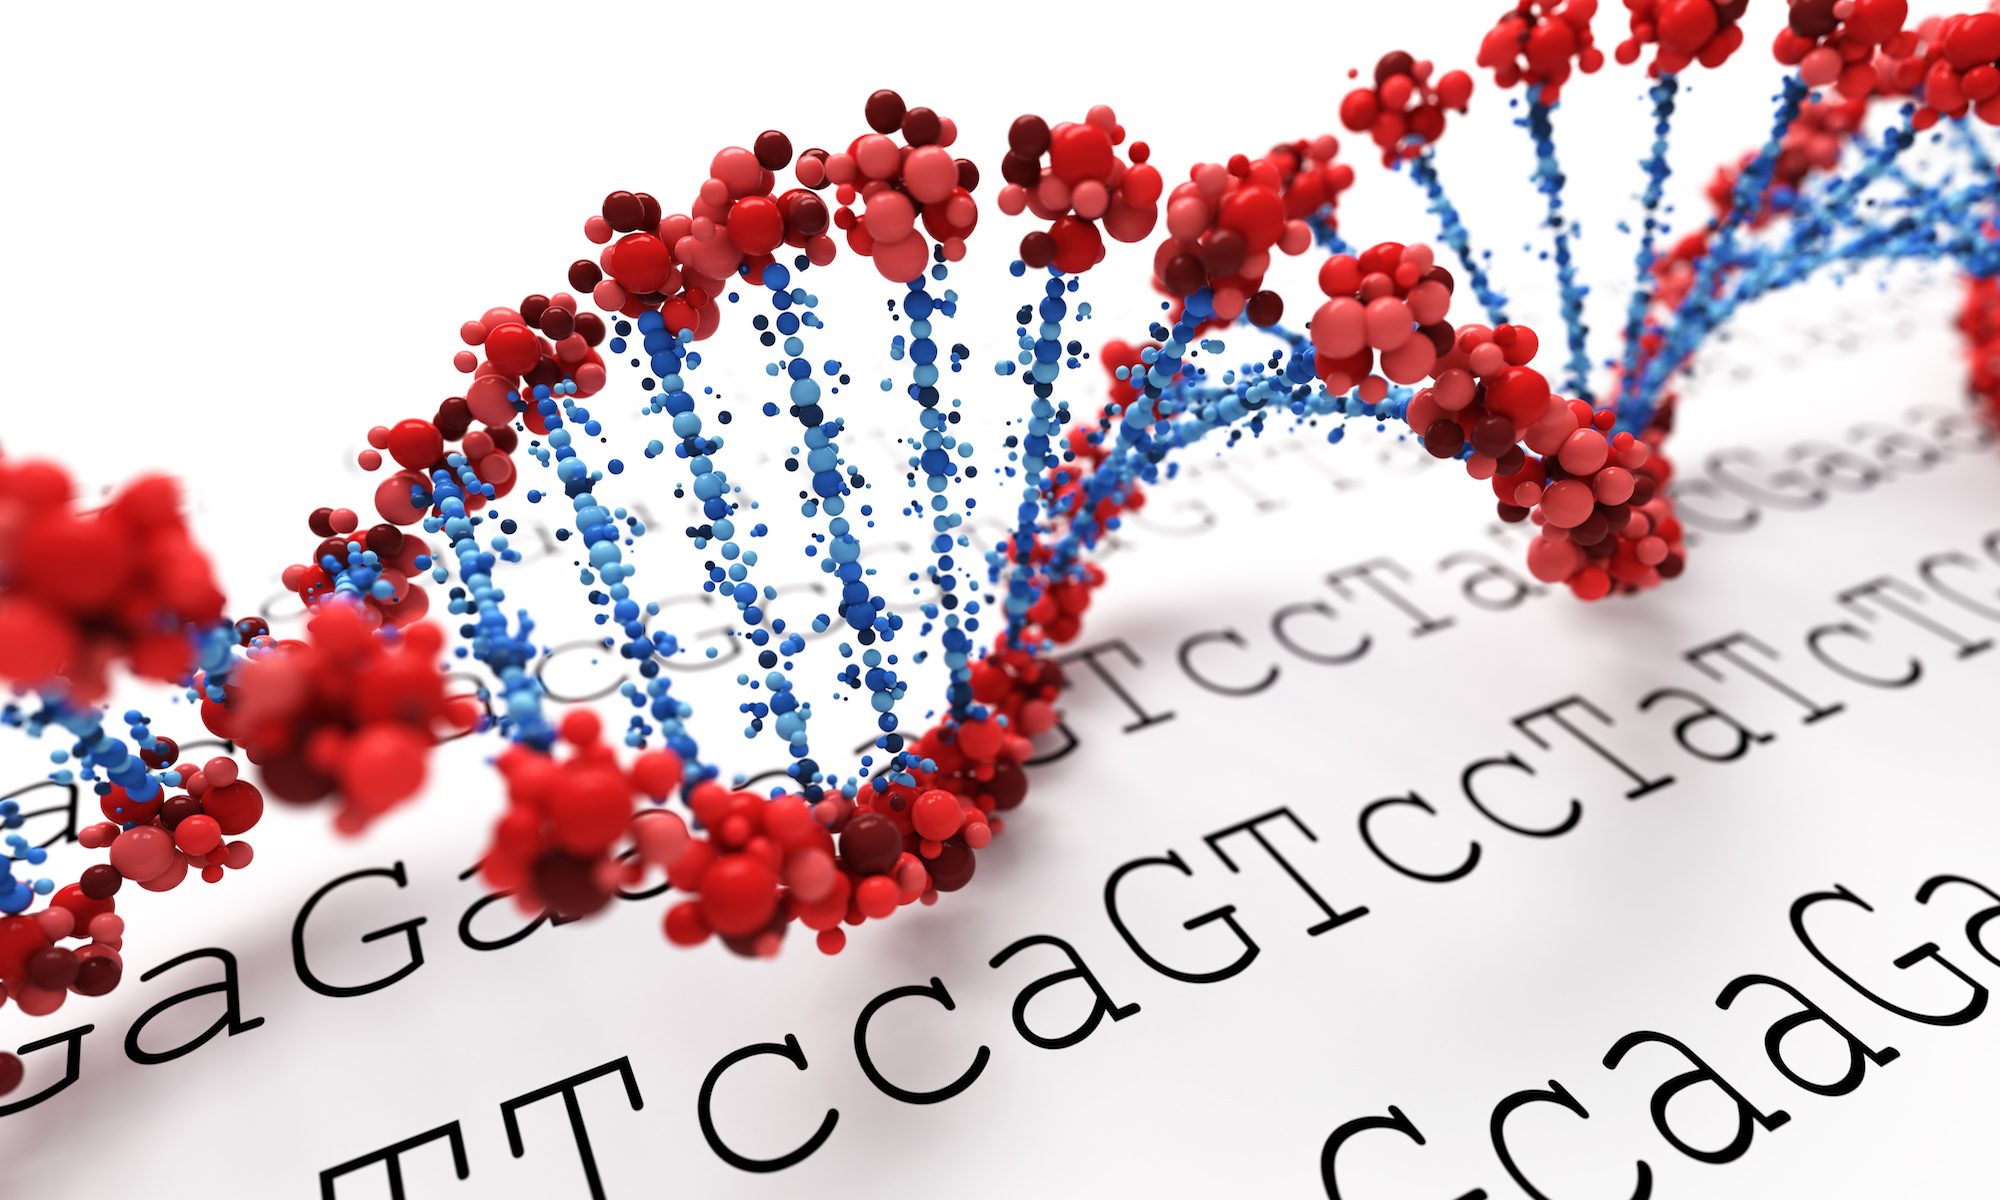 illustration of double helix with genetic sequence in background